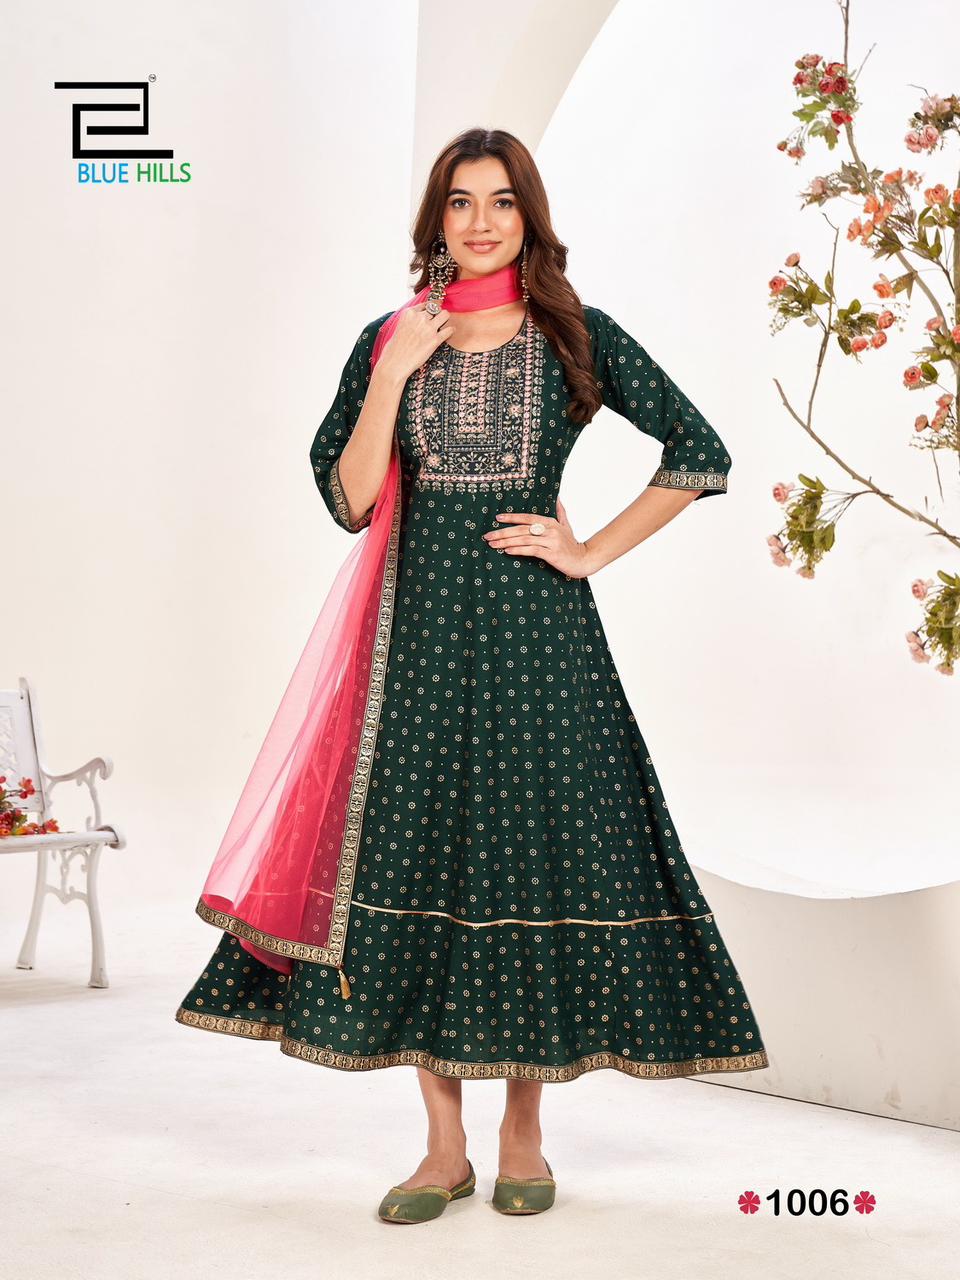 Blue Hills Manika Mage Hithe Vol 20 collection 8